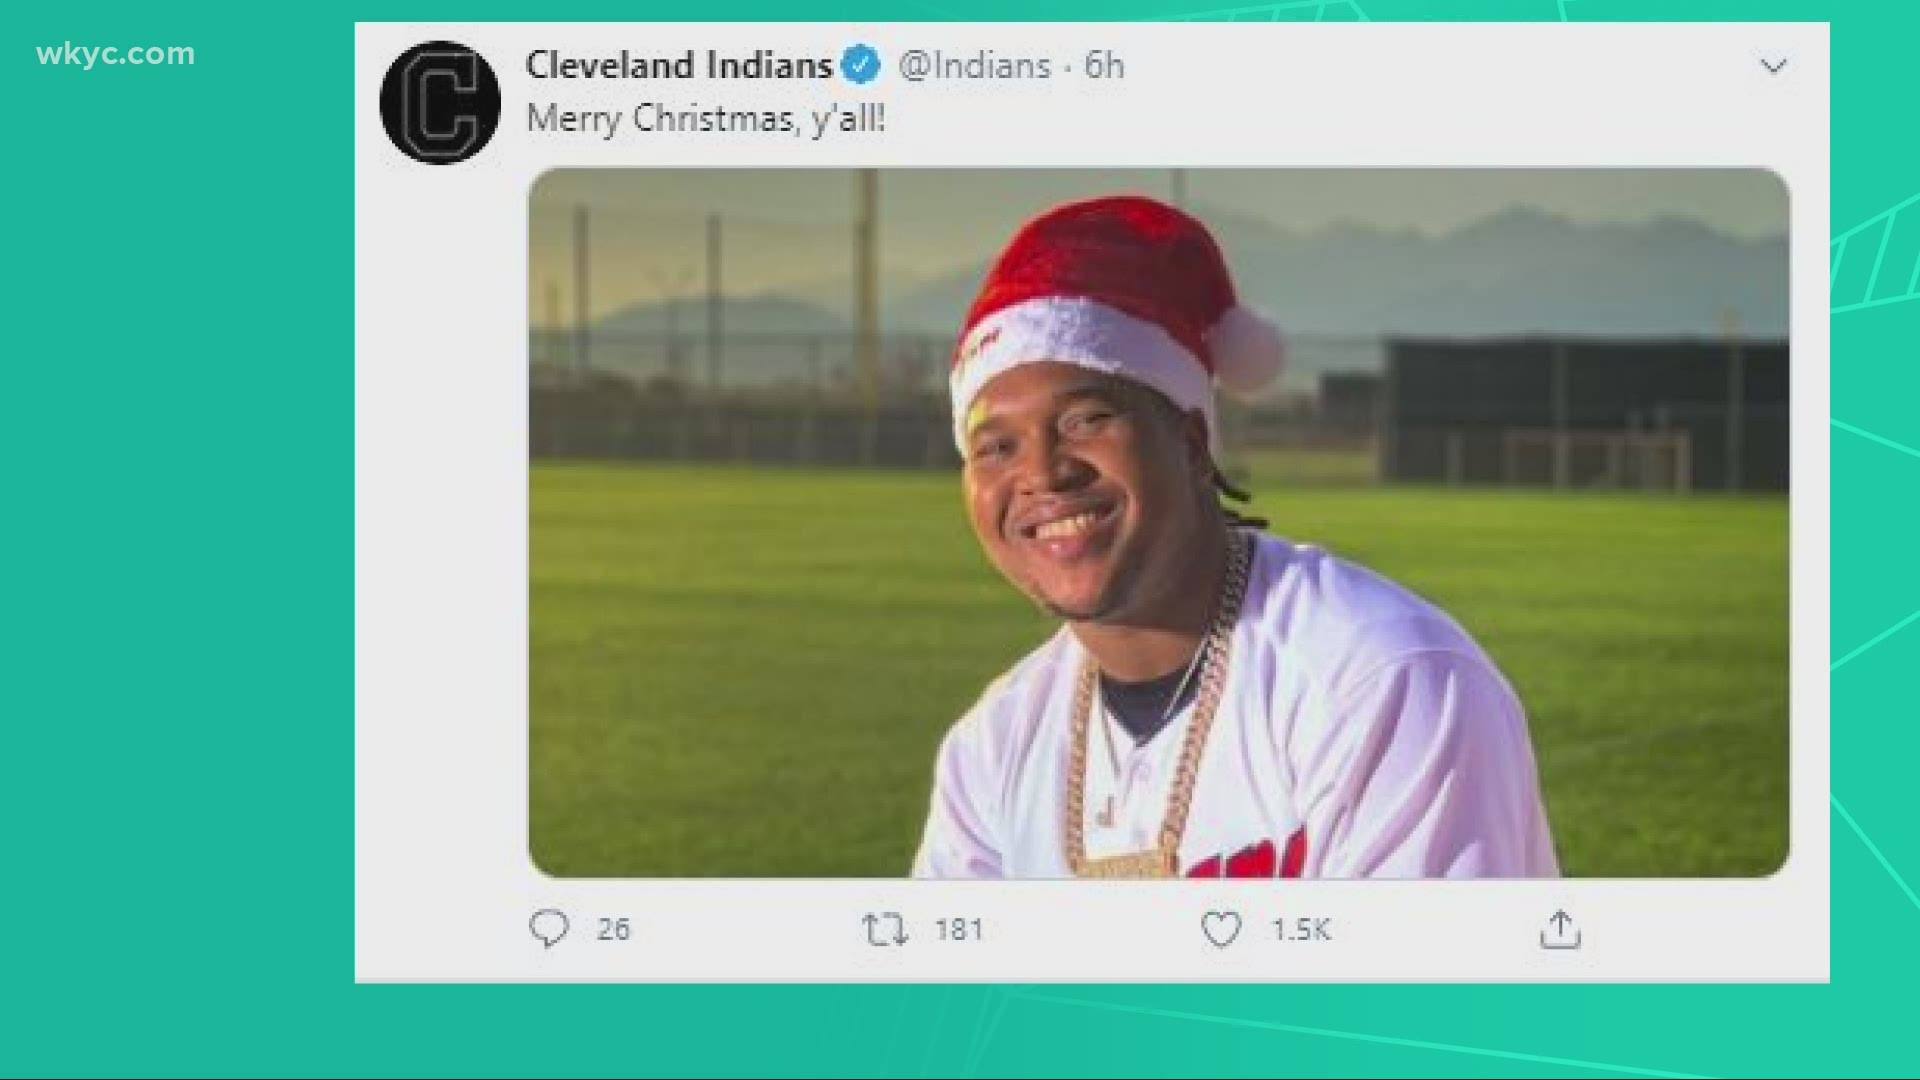 June 24, 2020: The Cleveland Indians are expressing their excitement as baseball prepares for its return.